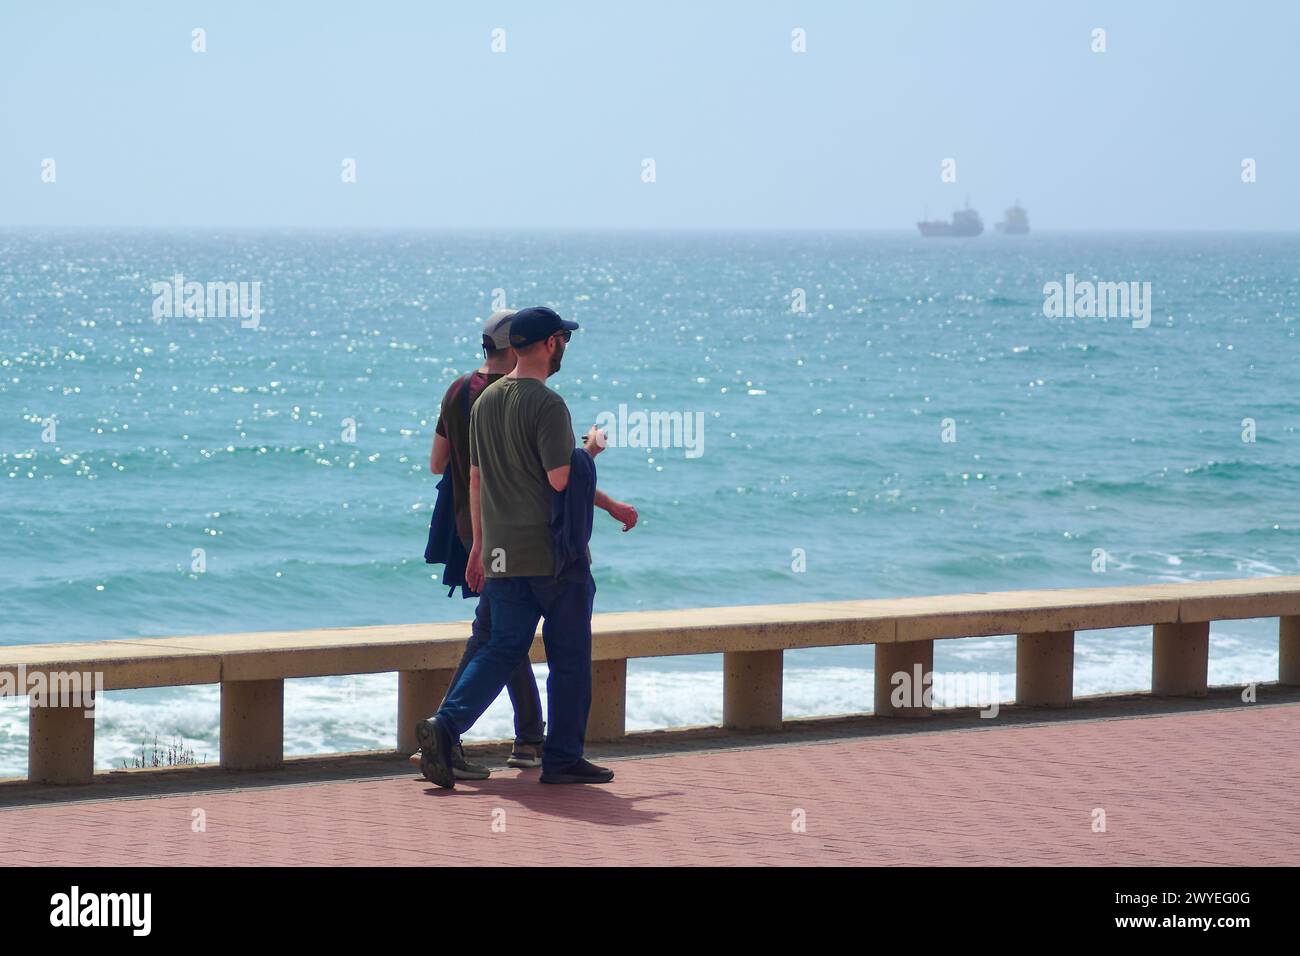 Tarragona, Spain - April 6, 2024: Two people enjoying a sunny boardwalk, with the blue sea and a boat in the distance, reflecting the tranquility of t Stock Photo